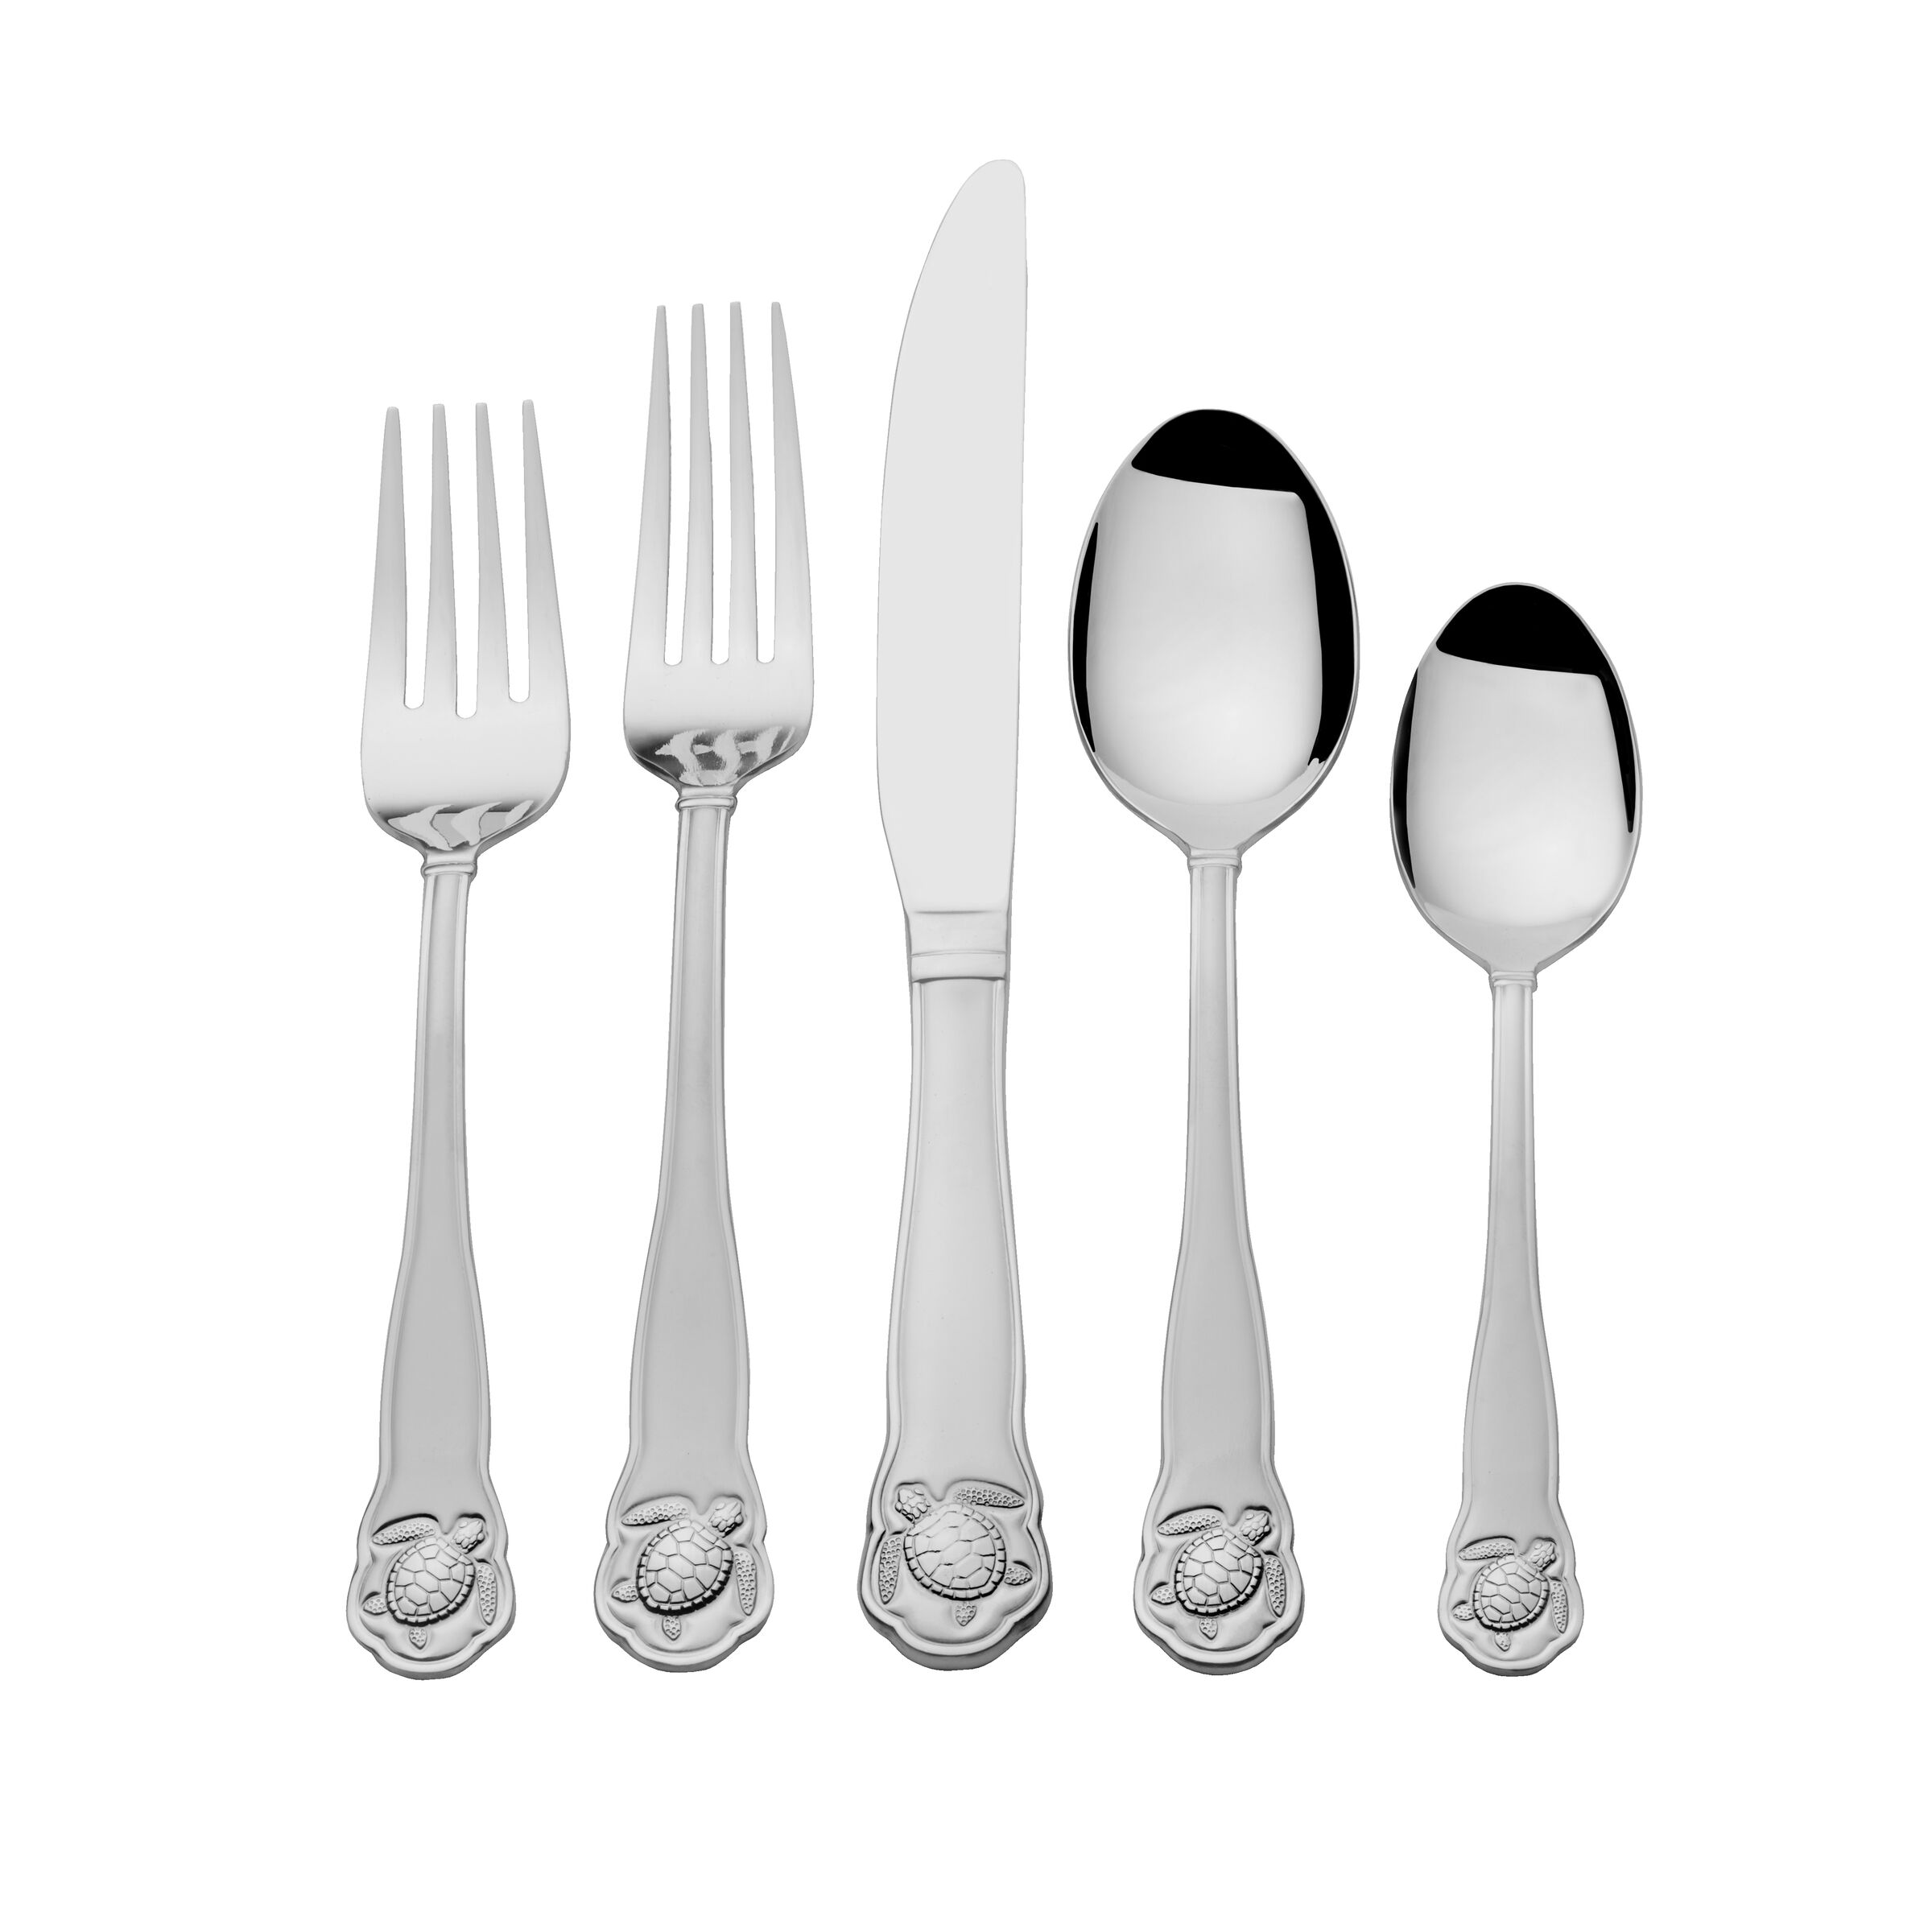 Outline Rainbow cutlery, small fork knife and spoon & big items.